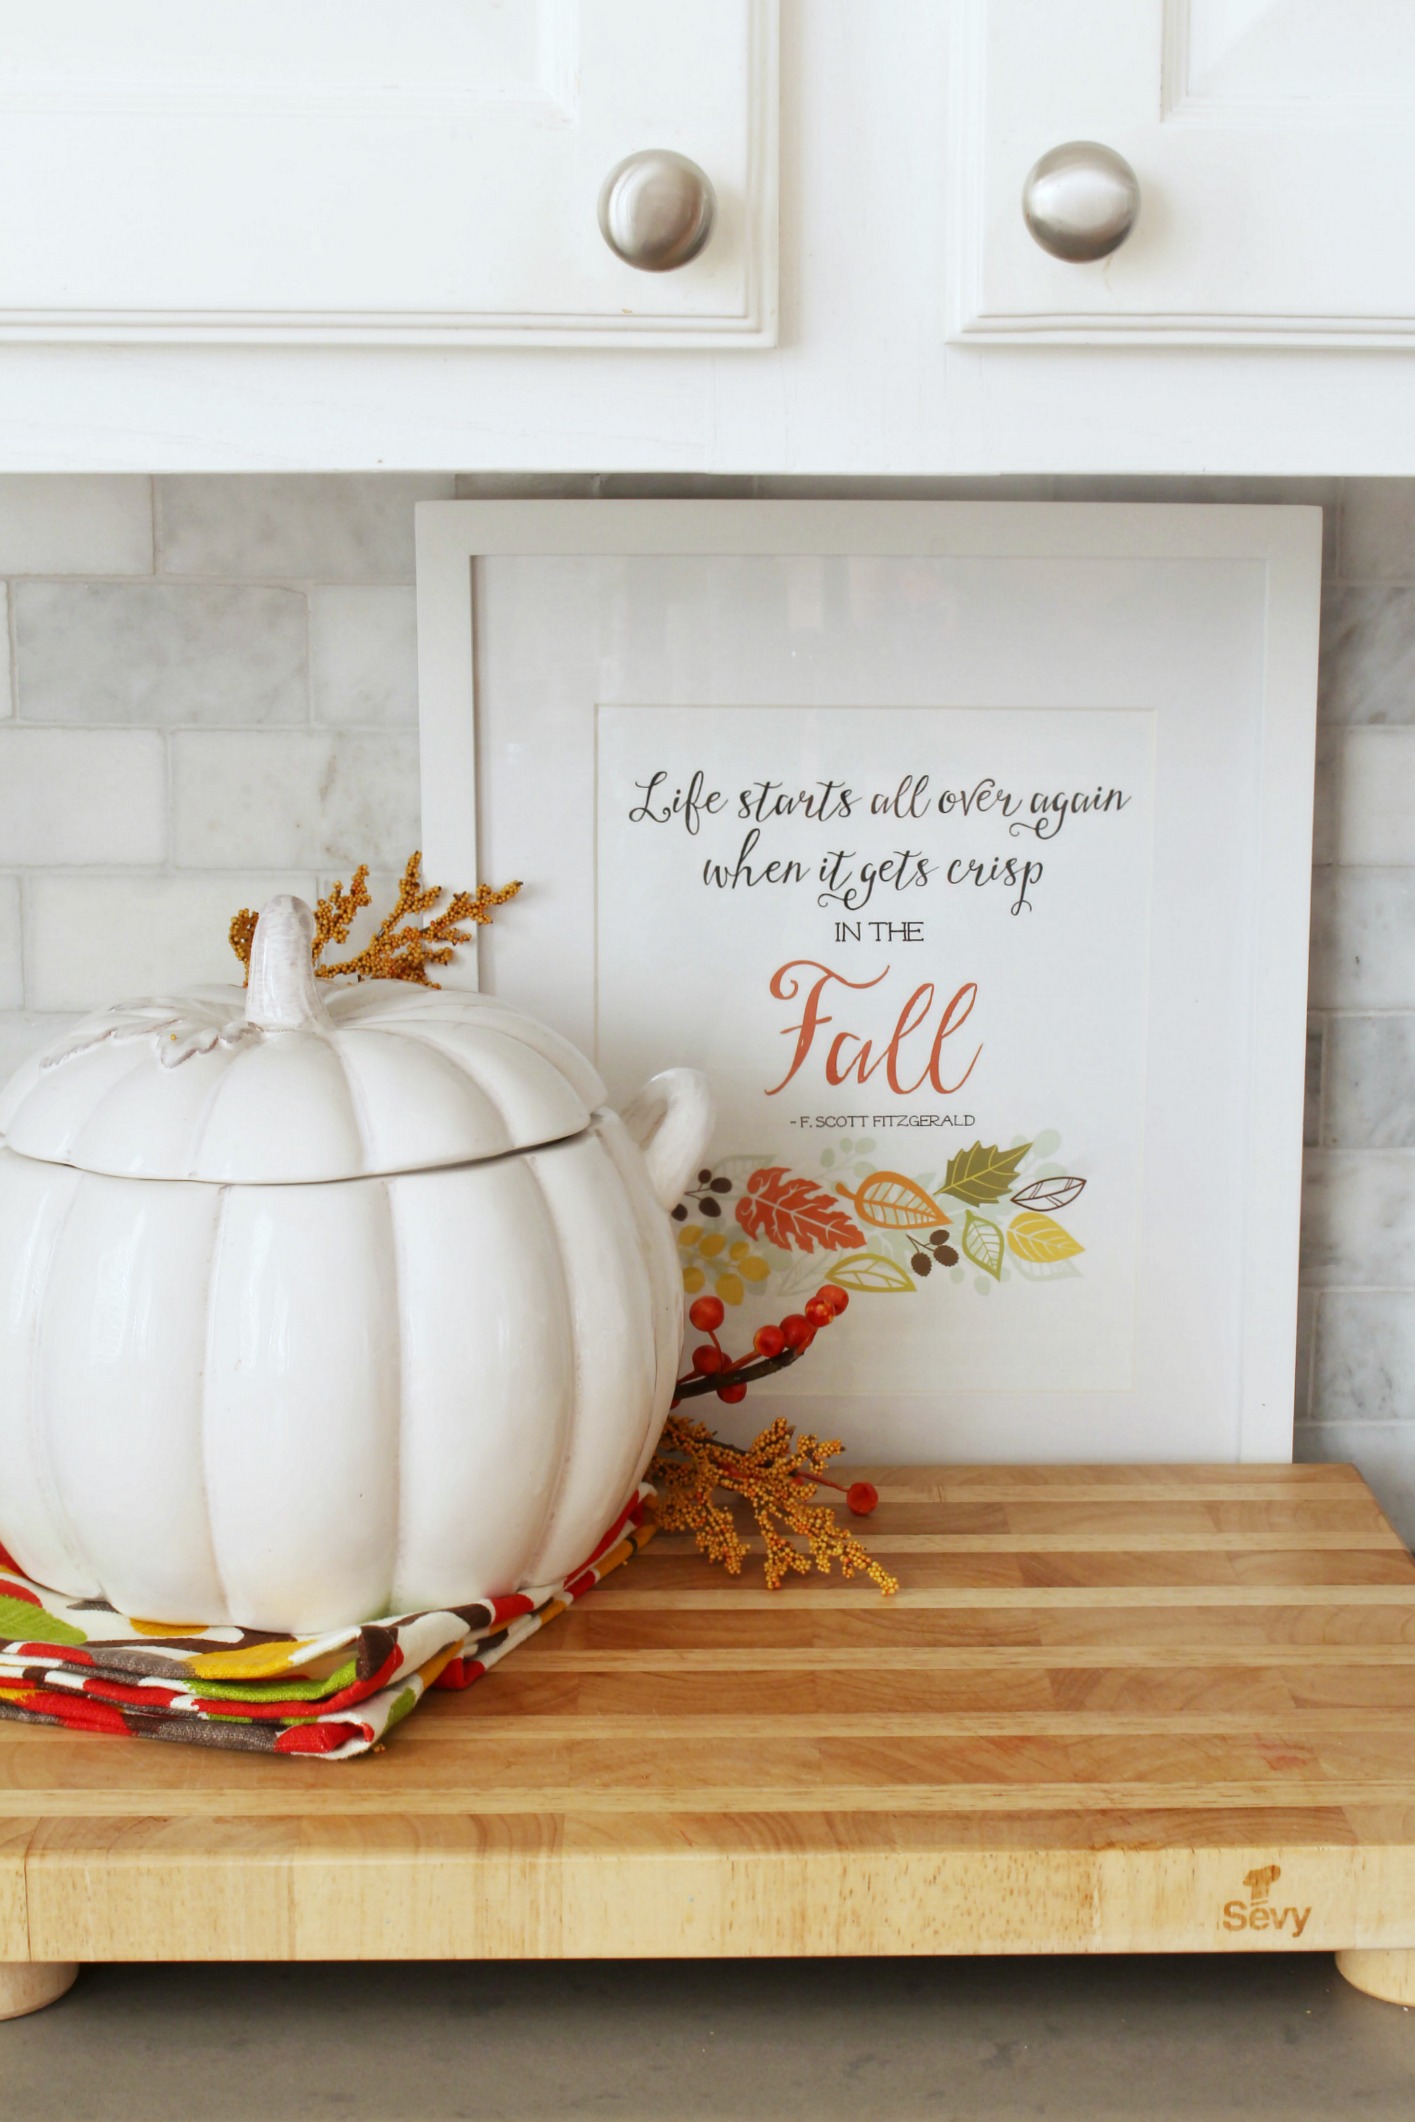 Easy fall kitchen decorating ideas. Simple ways to add some fall to your kitchen decor! 